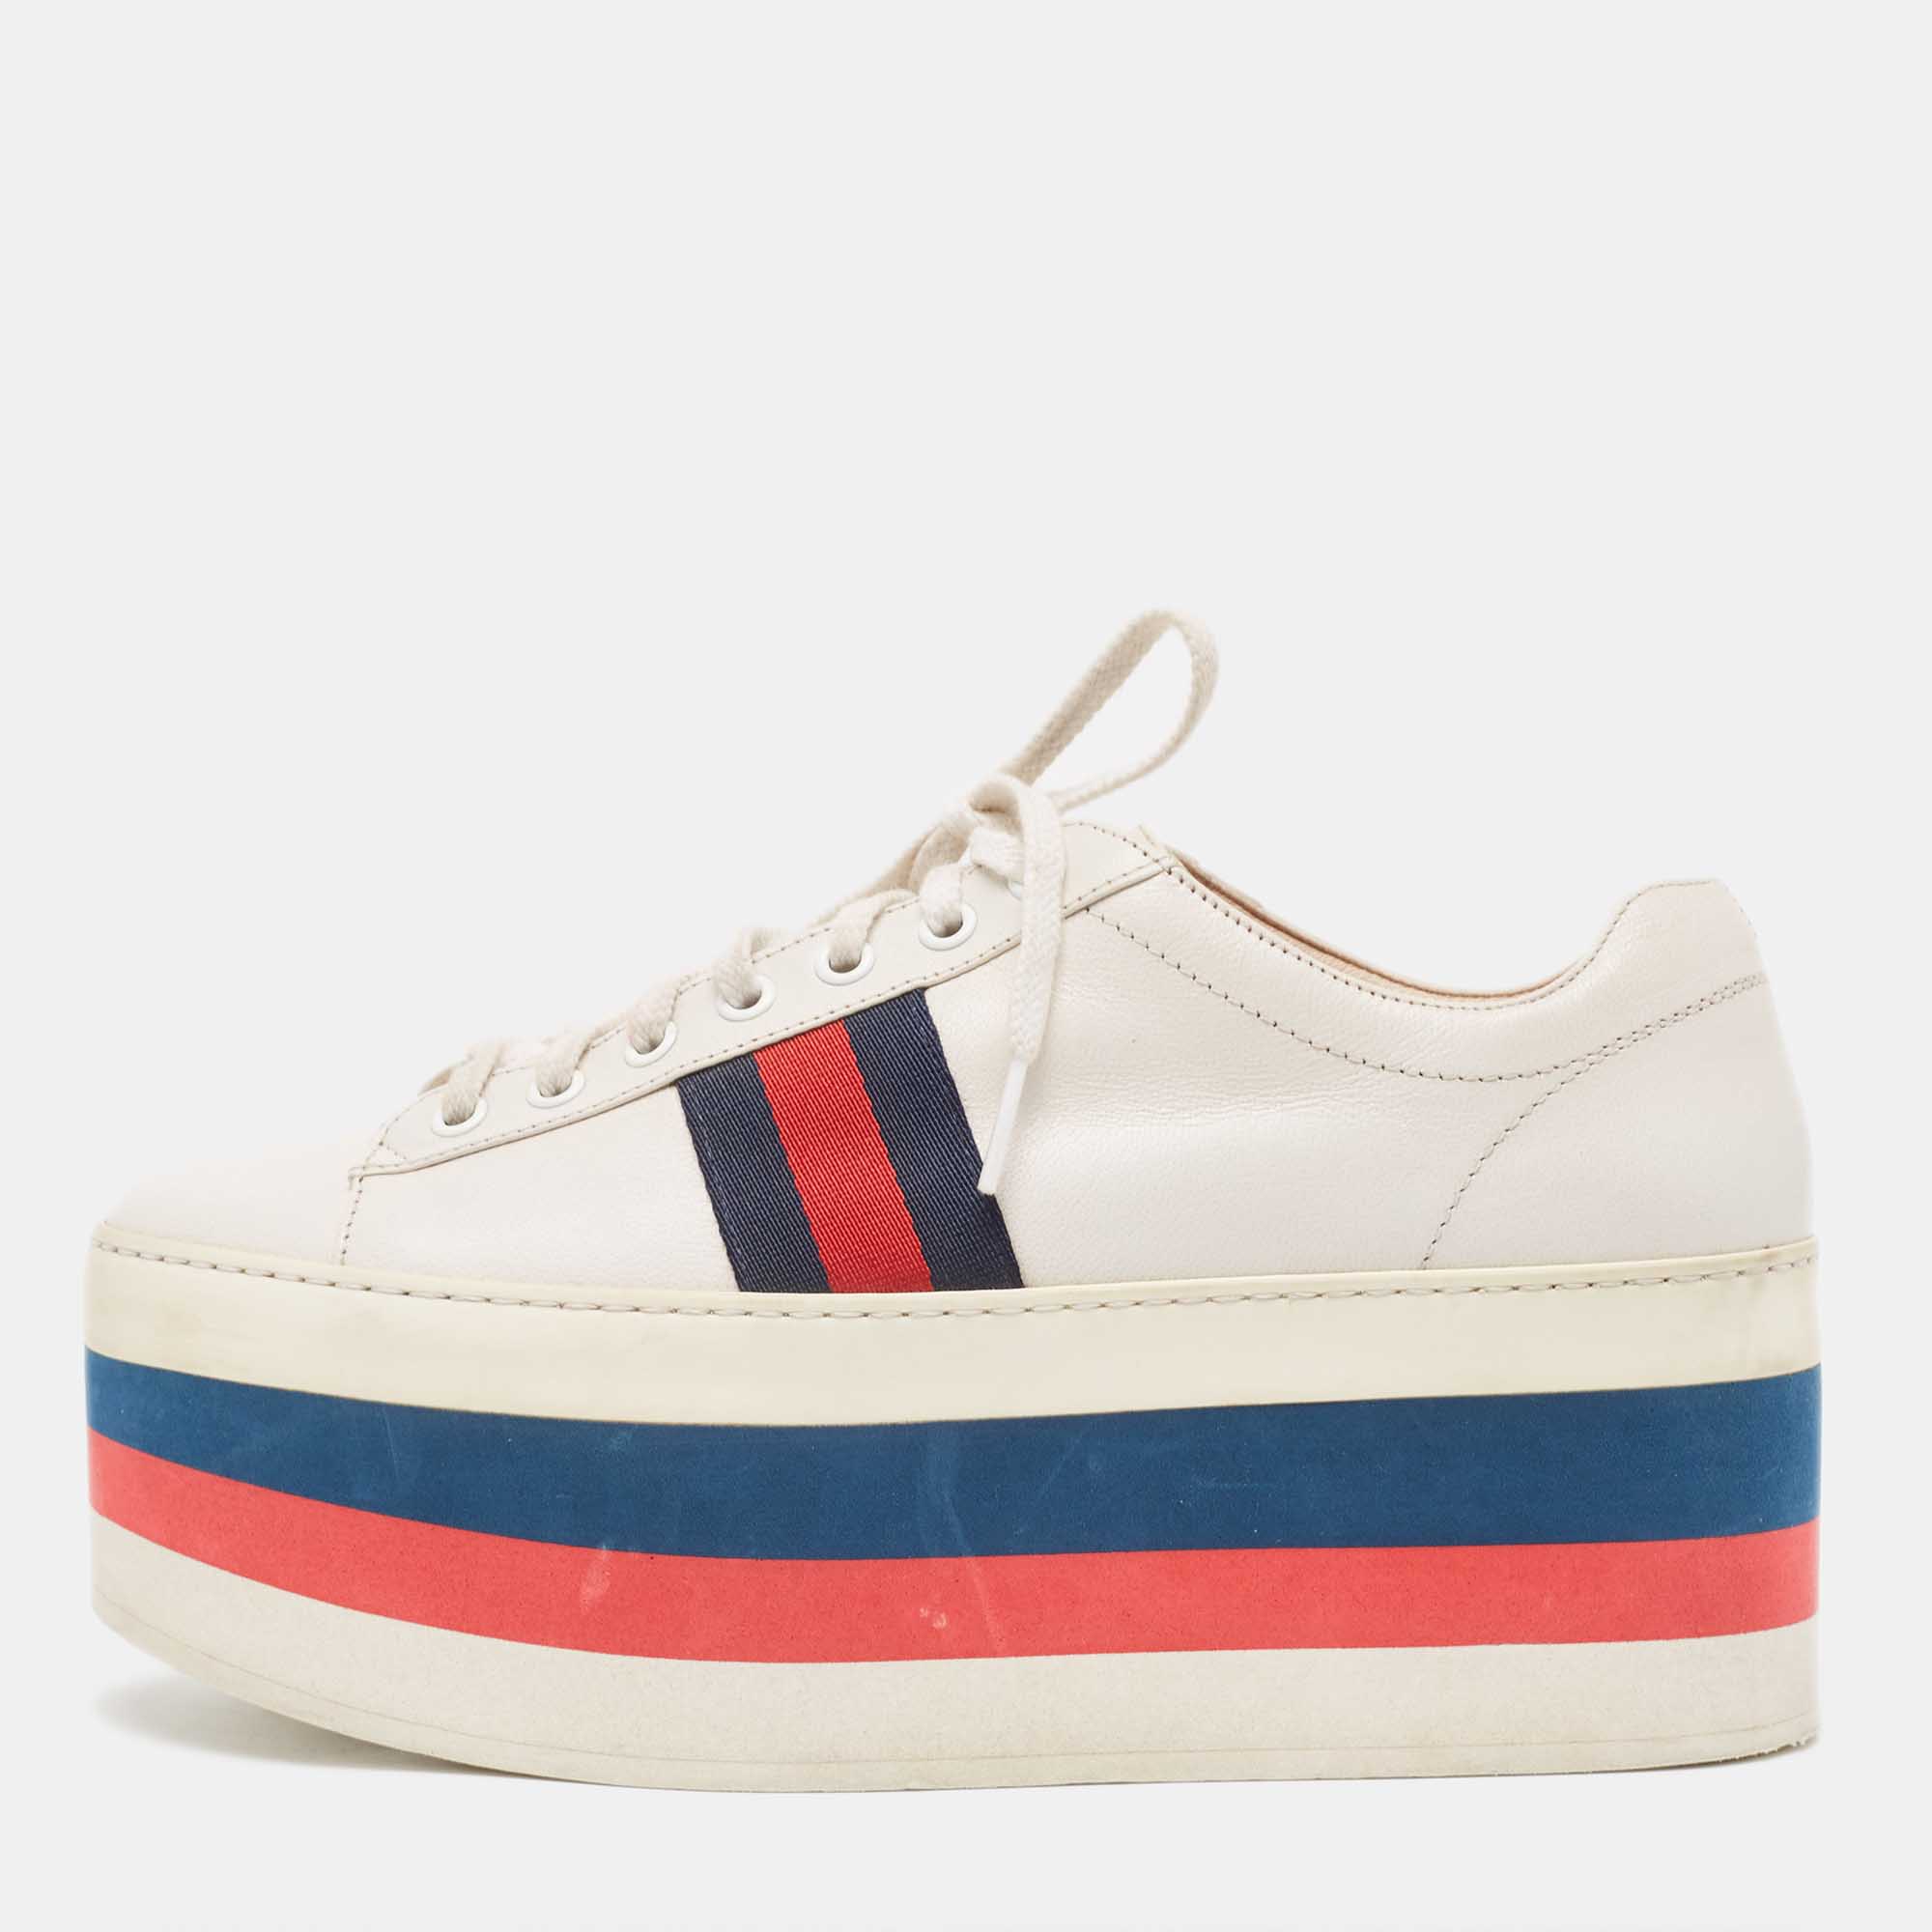 Pre-owned Gucci Cream Leather Ace Platform Sneakers Size 39